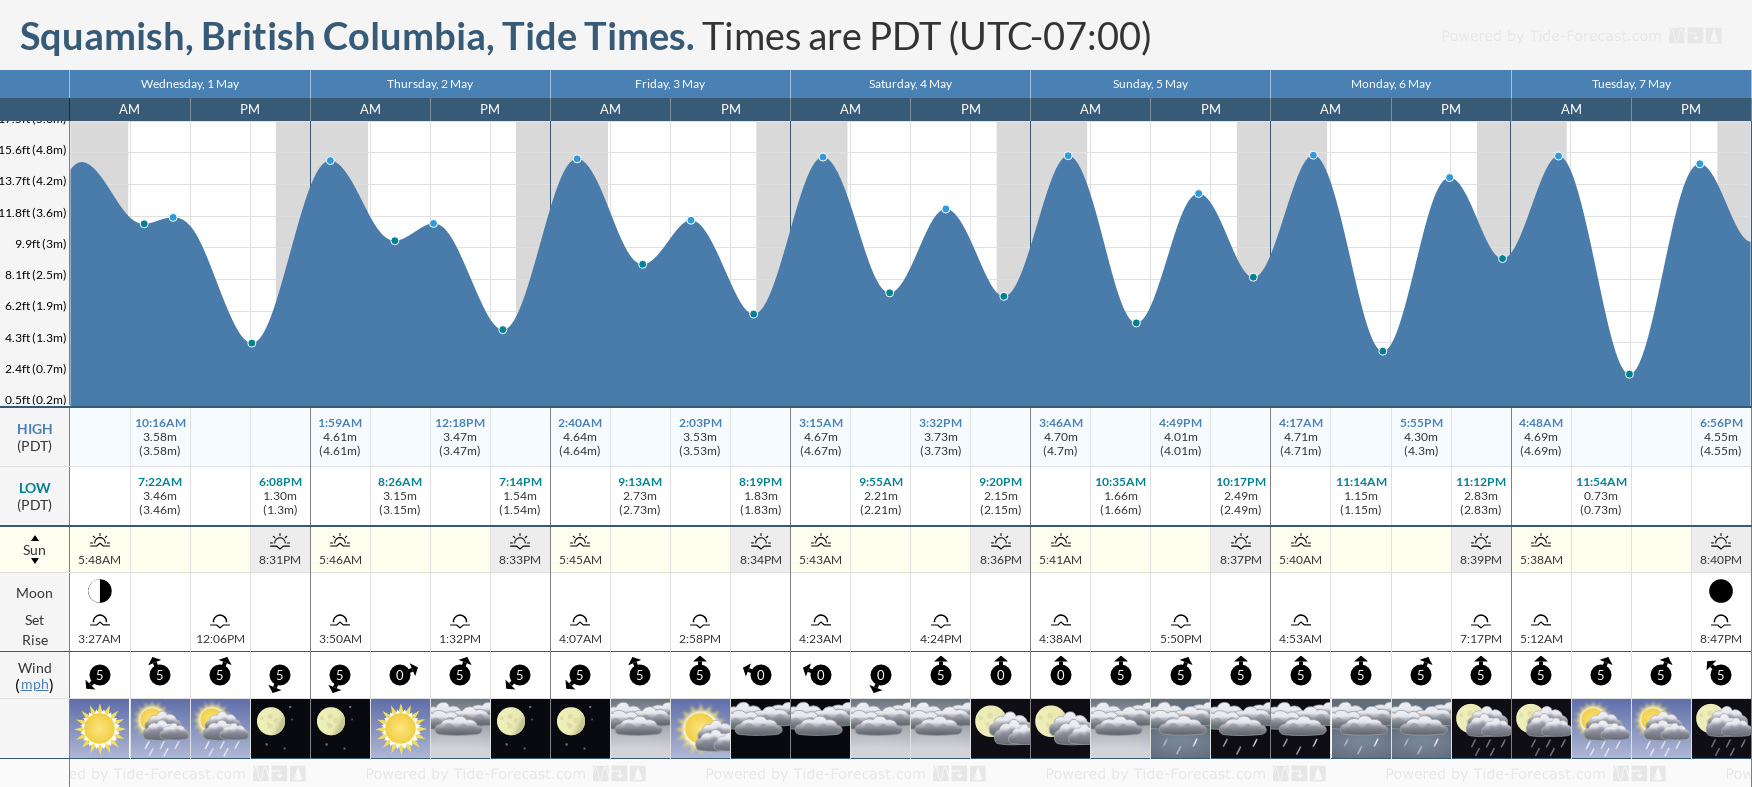 Squamish, British Columbia Tide Chart including high and low tide tide times for the next 7 days